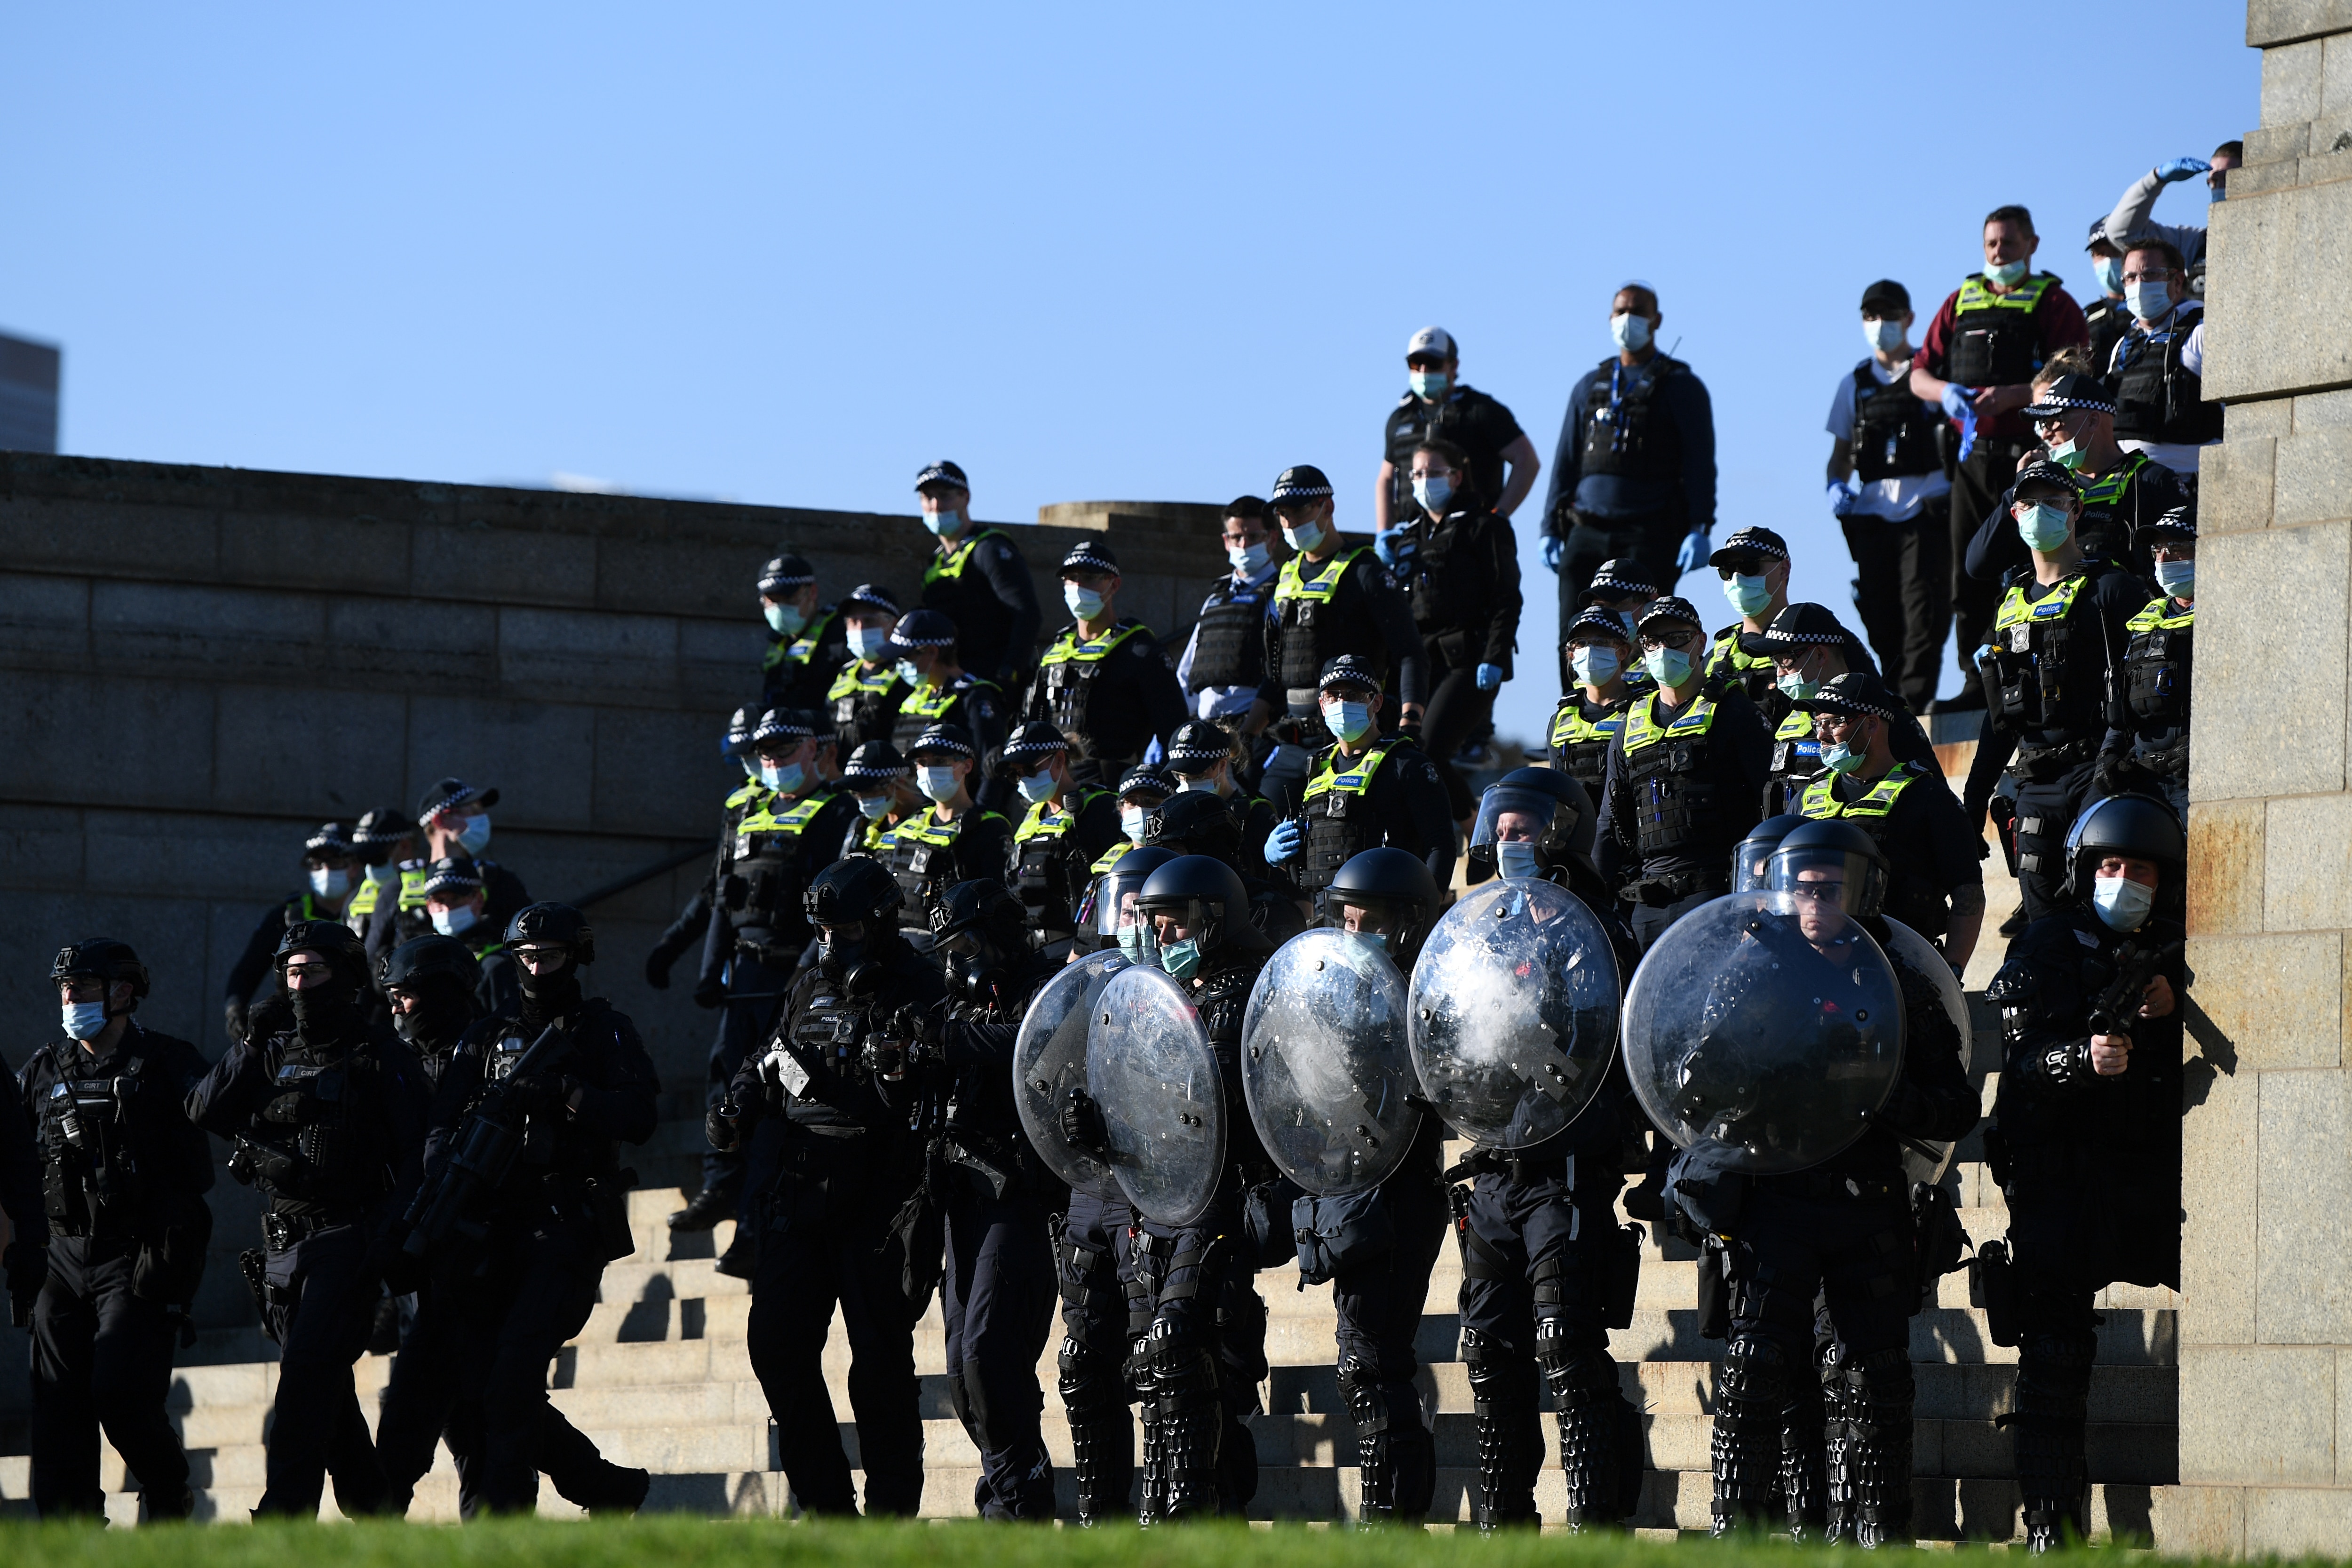 Riot police move protesters on at the Shrine of Remembrance in Melbourne on 22 September, 2021. 